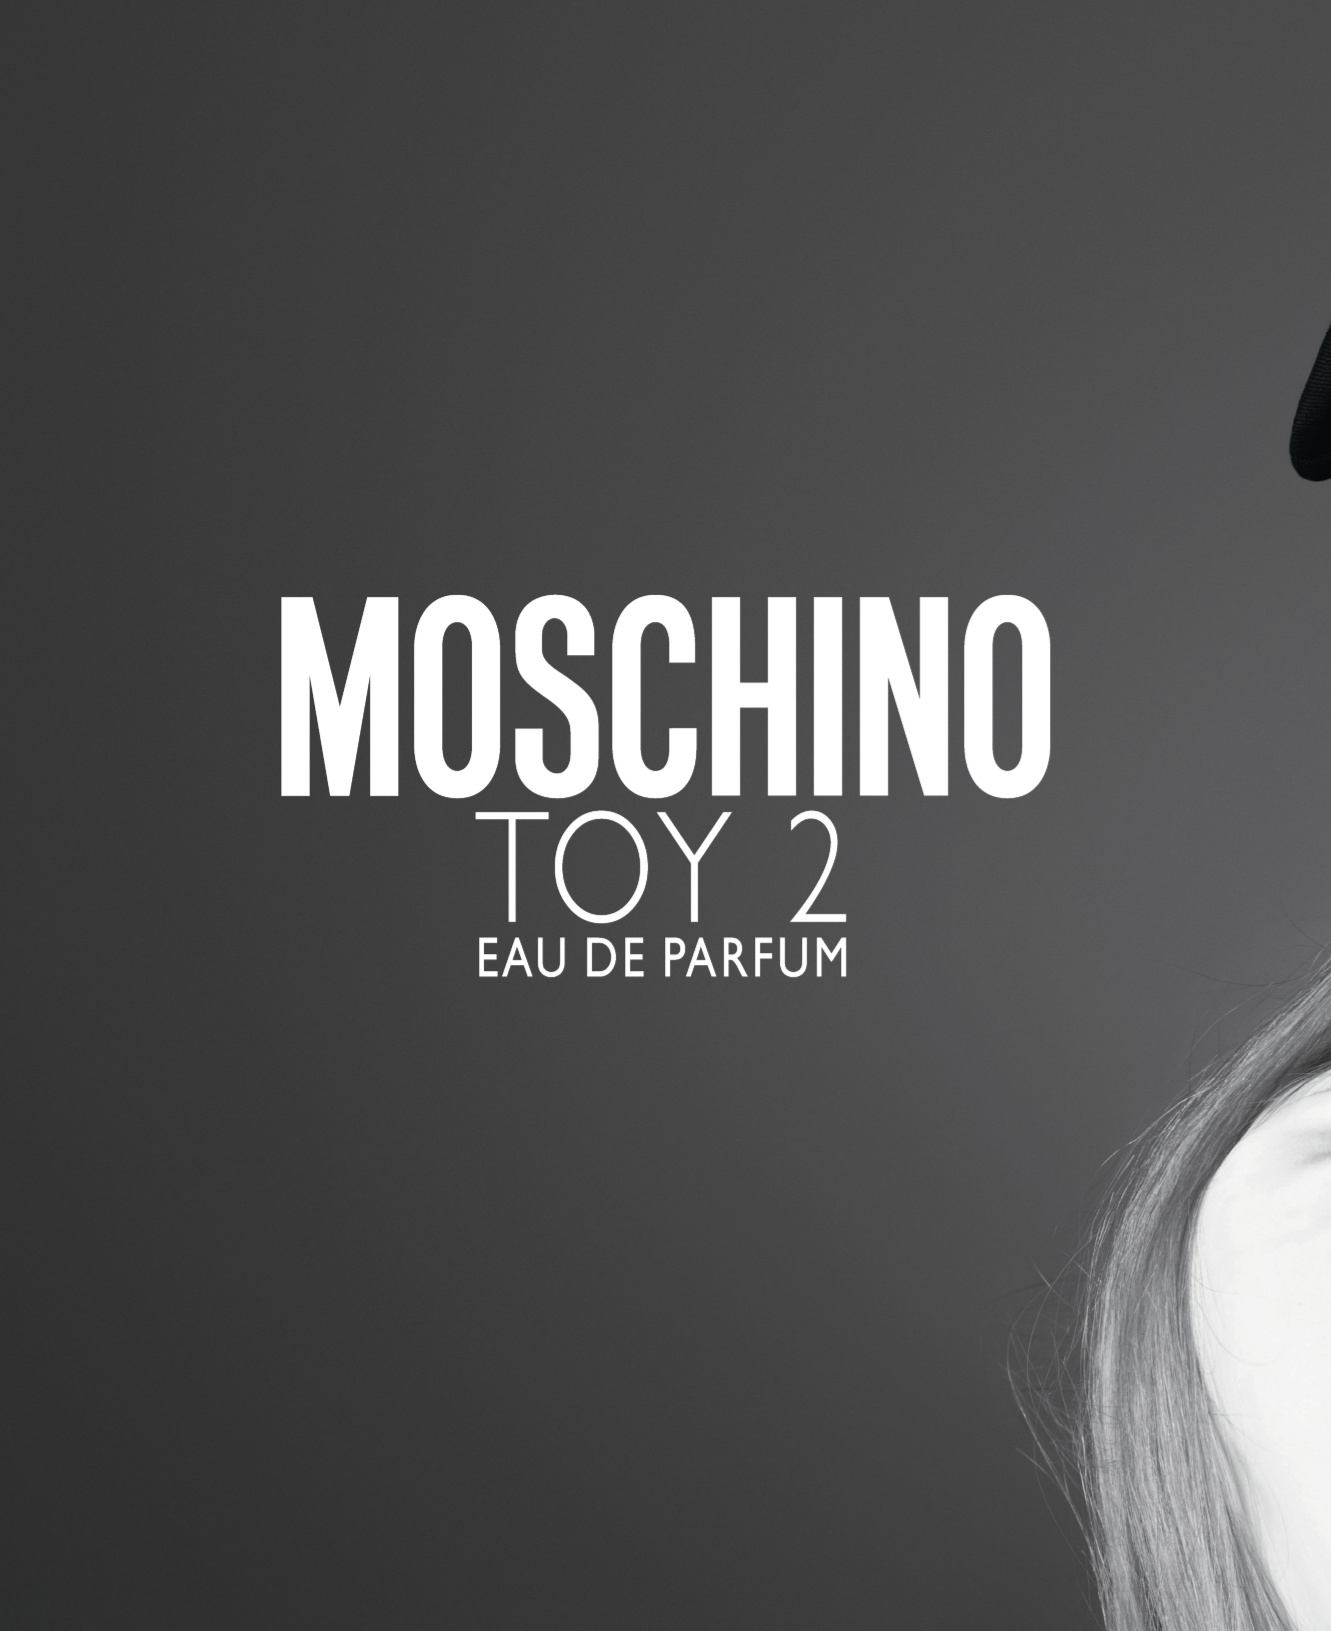 Meisel Moschino Toy 2 2019 01